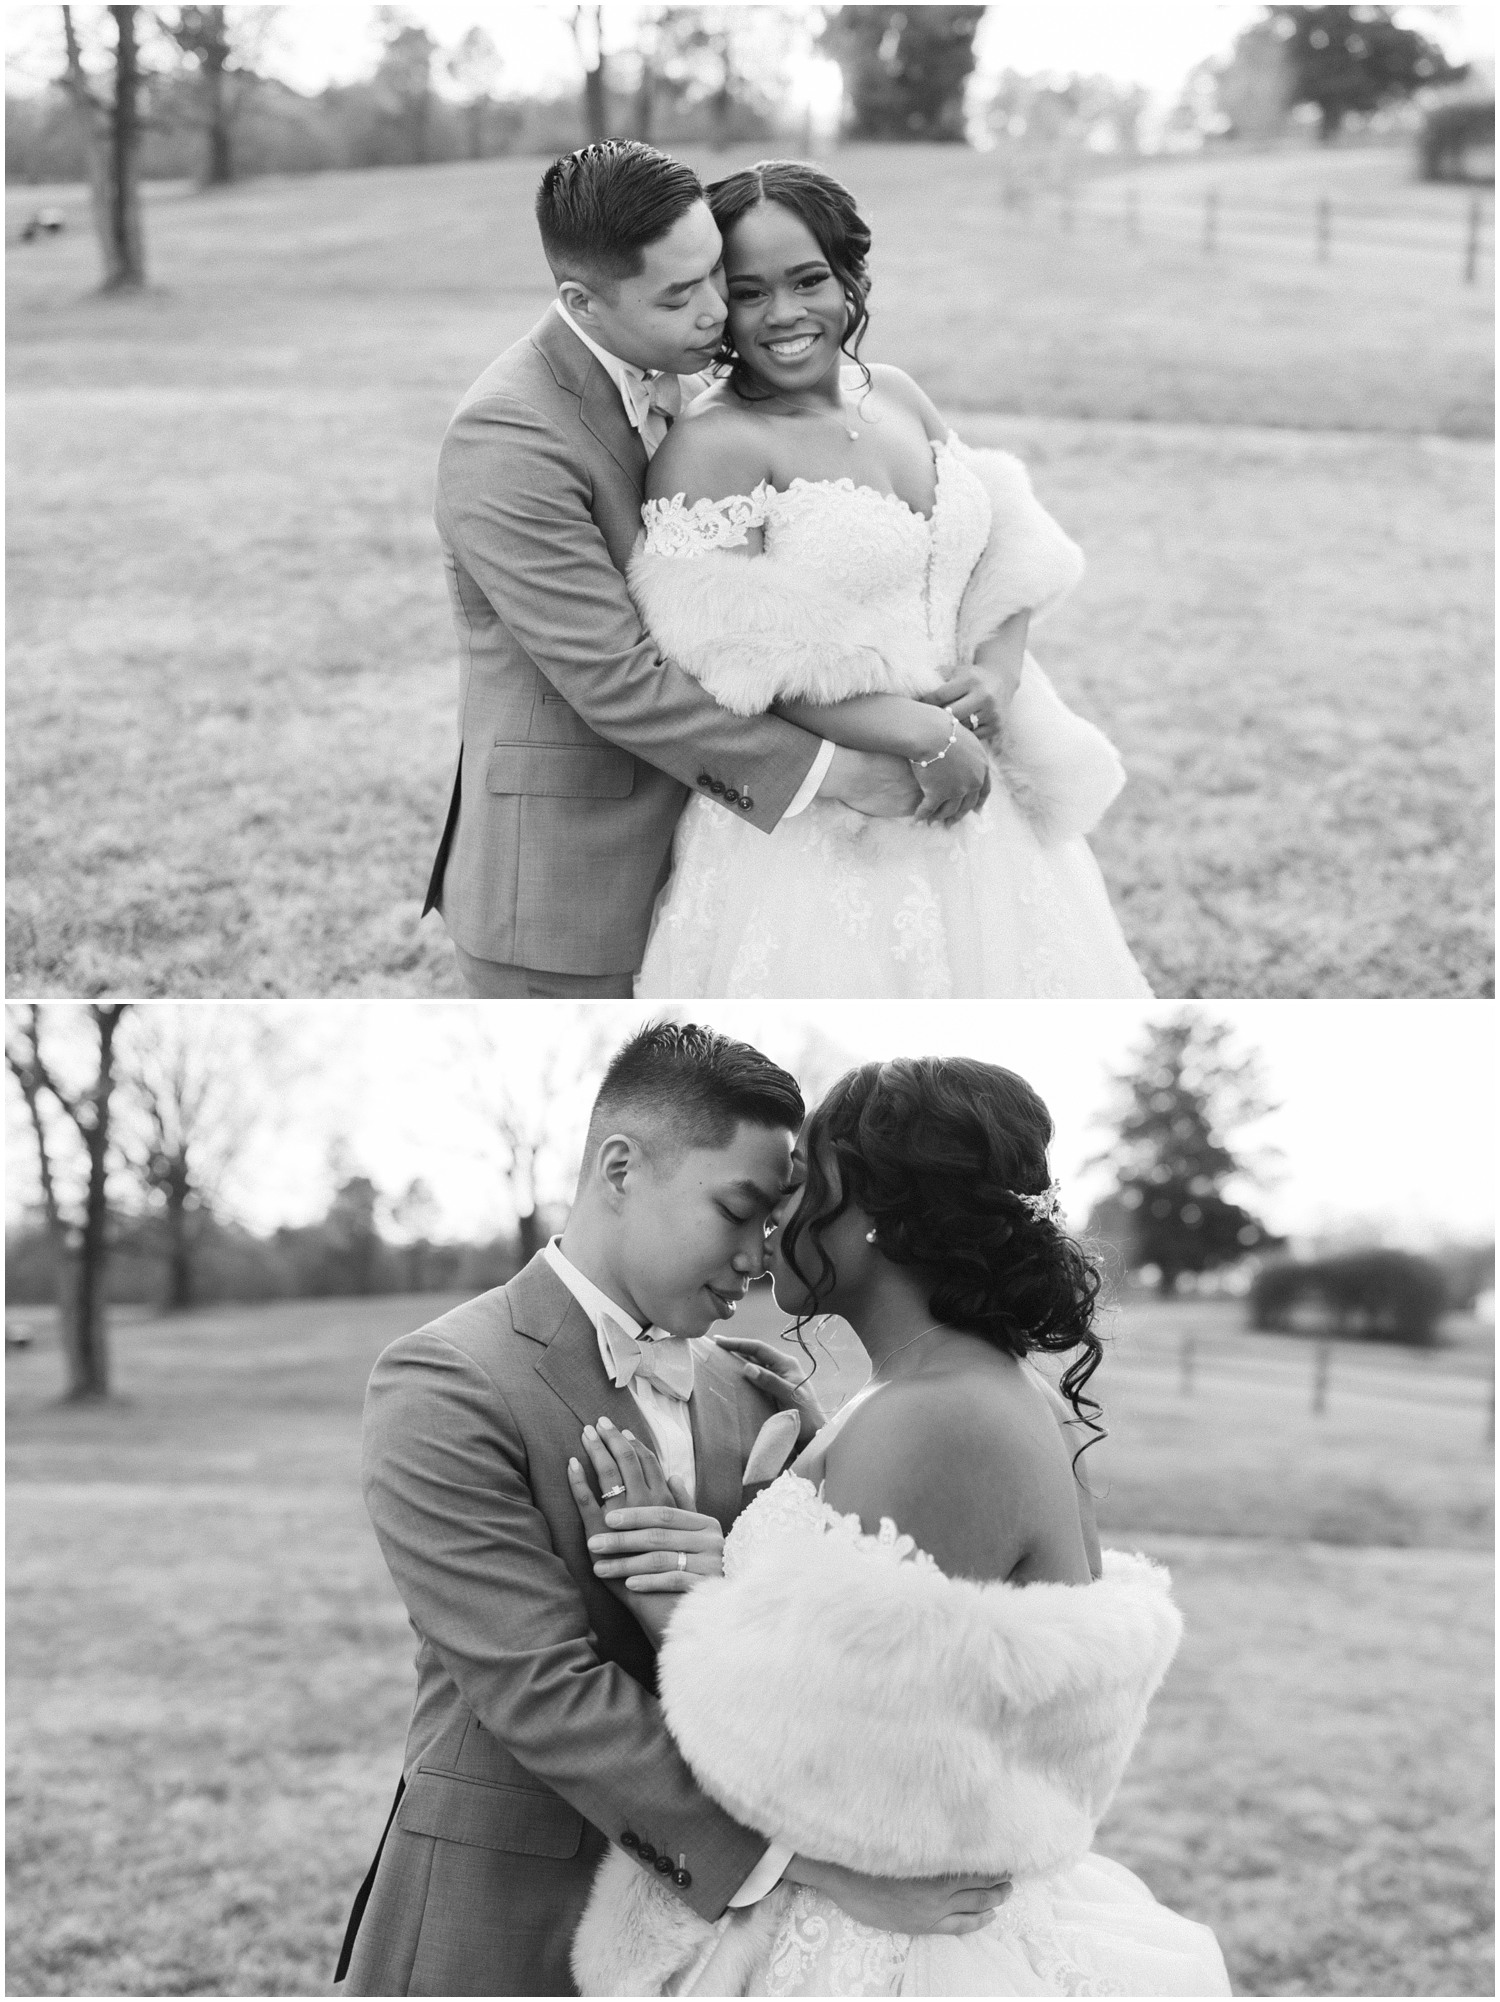 Romantic photos of couple at The Barn at Valhalla in Raleigh, NC.